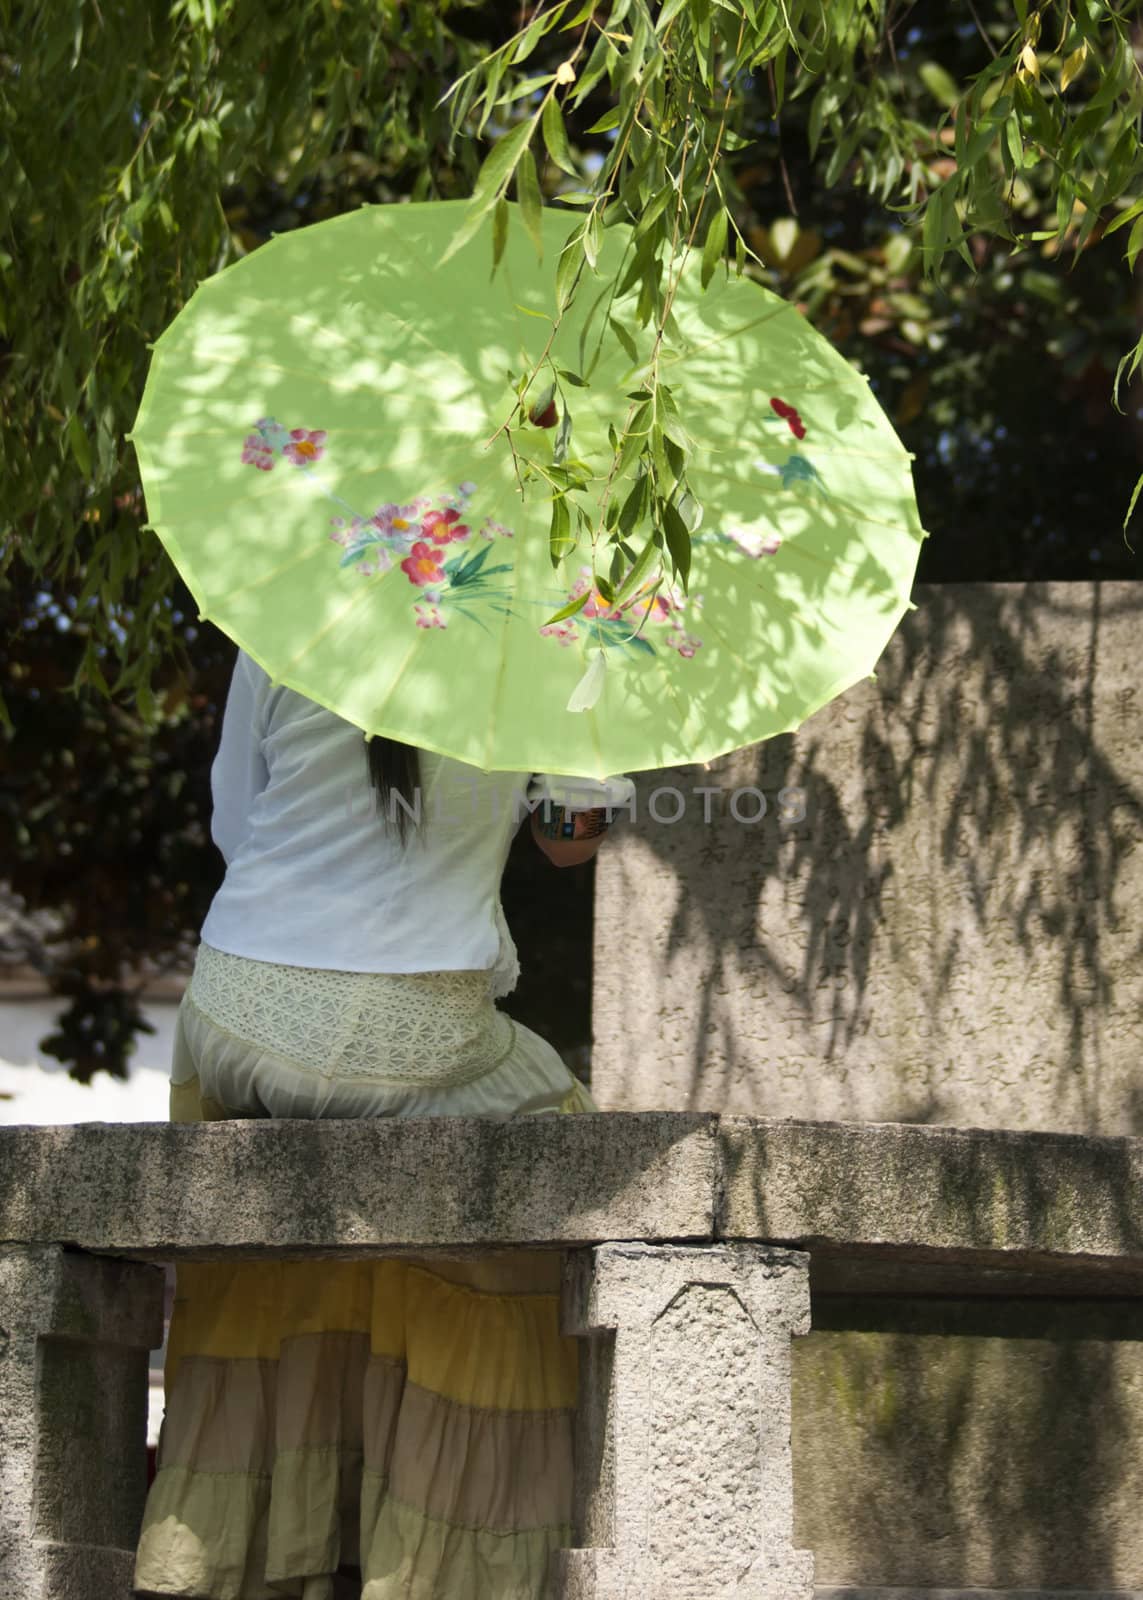 Tongli: lonely lady under umbrella caught in romantic thought. by Claudine